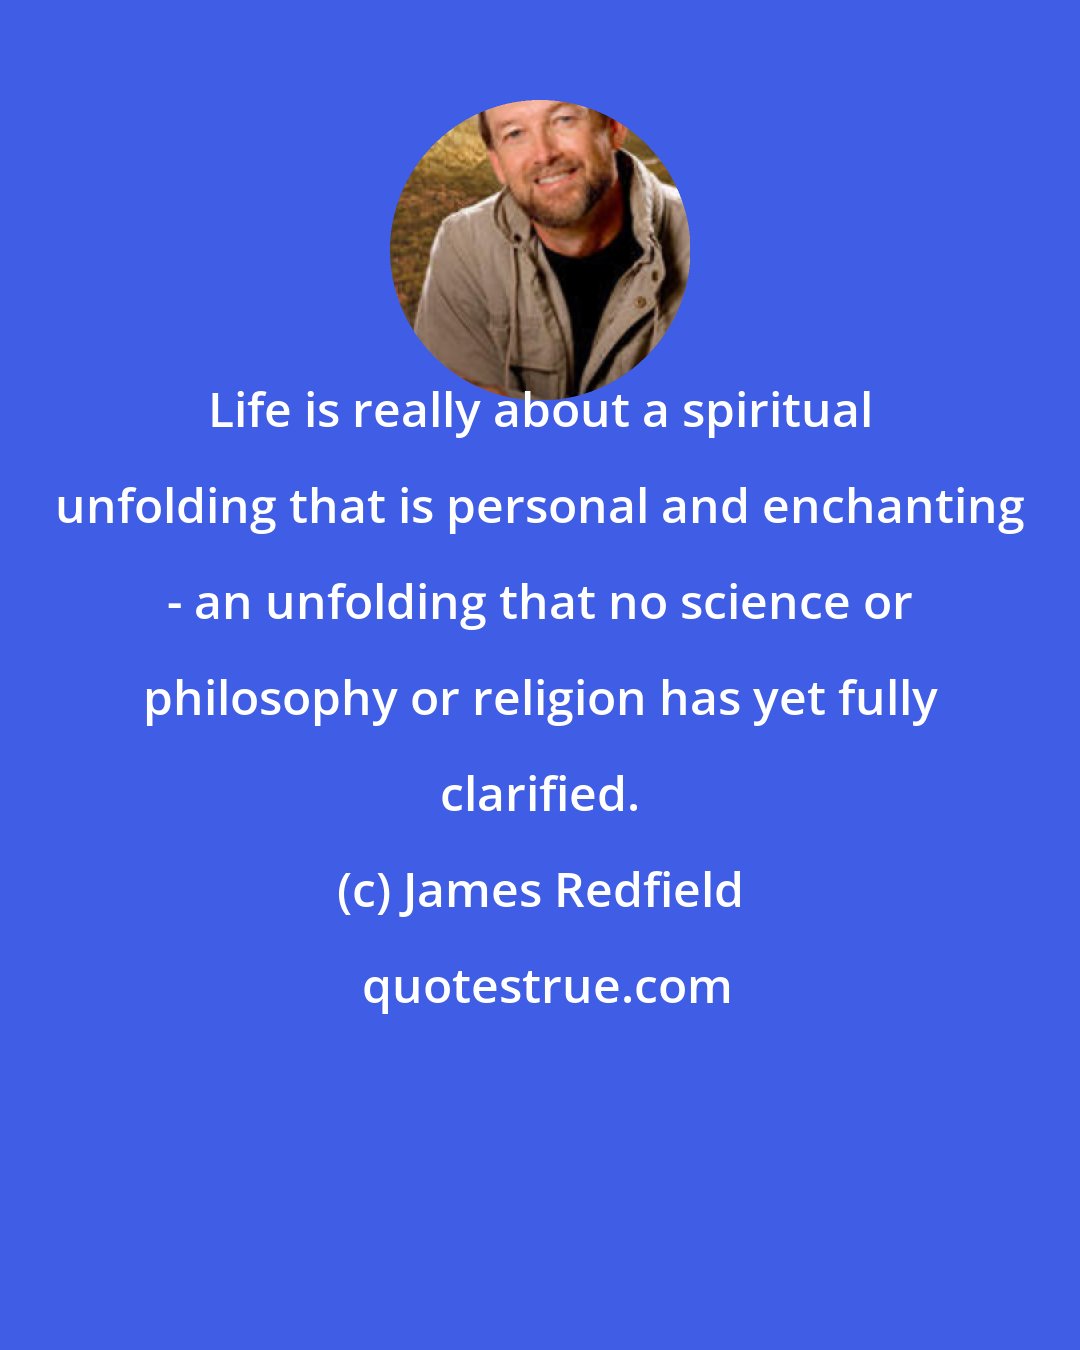 James Redfield: Life is really about a spiritual unfolding that is personal and enchanting - an unfolding that no science or philosophy or religion has yet fully clarified.